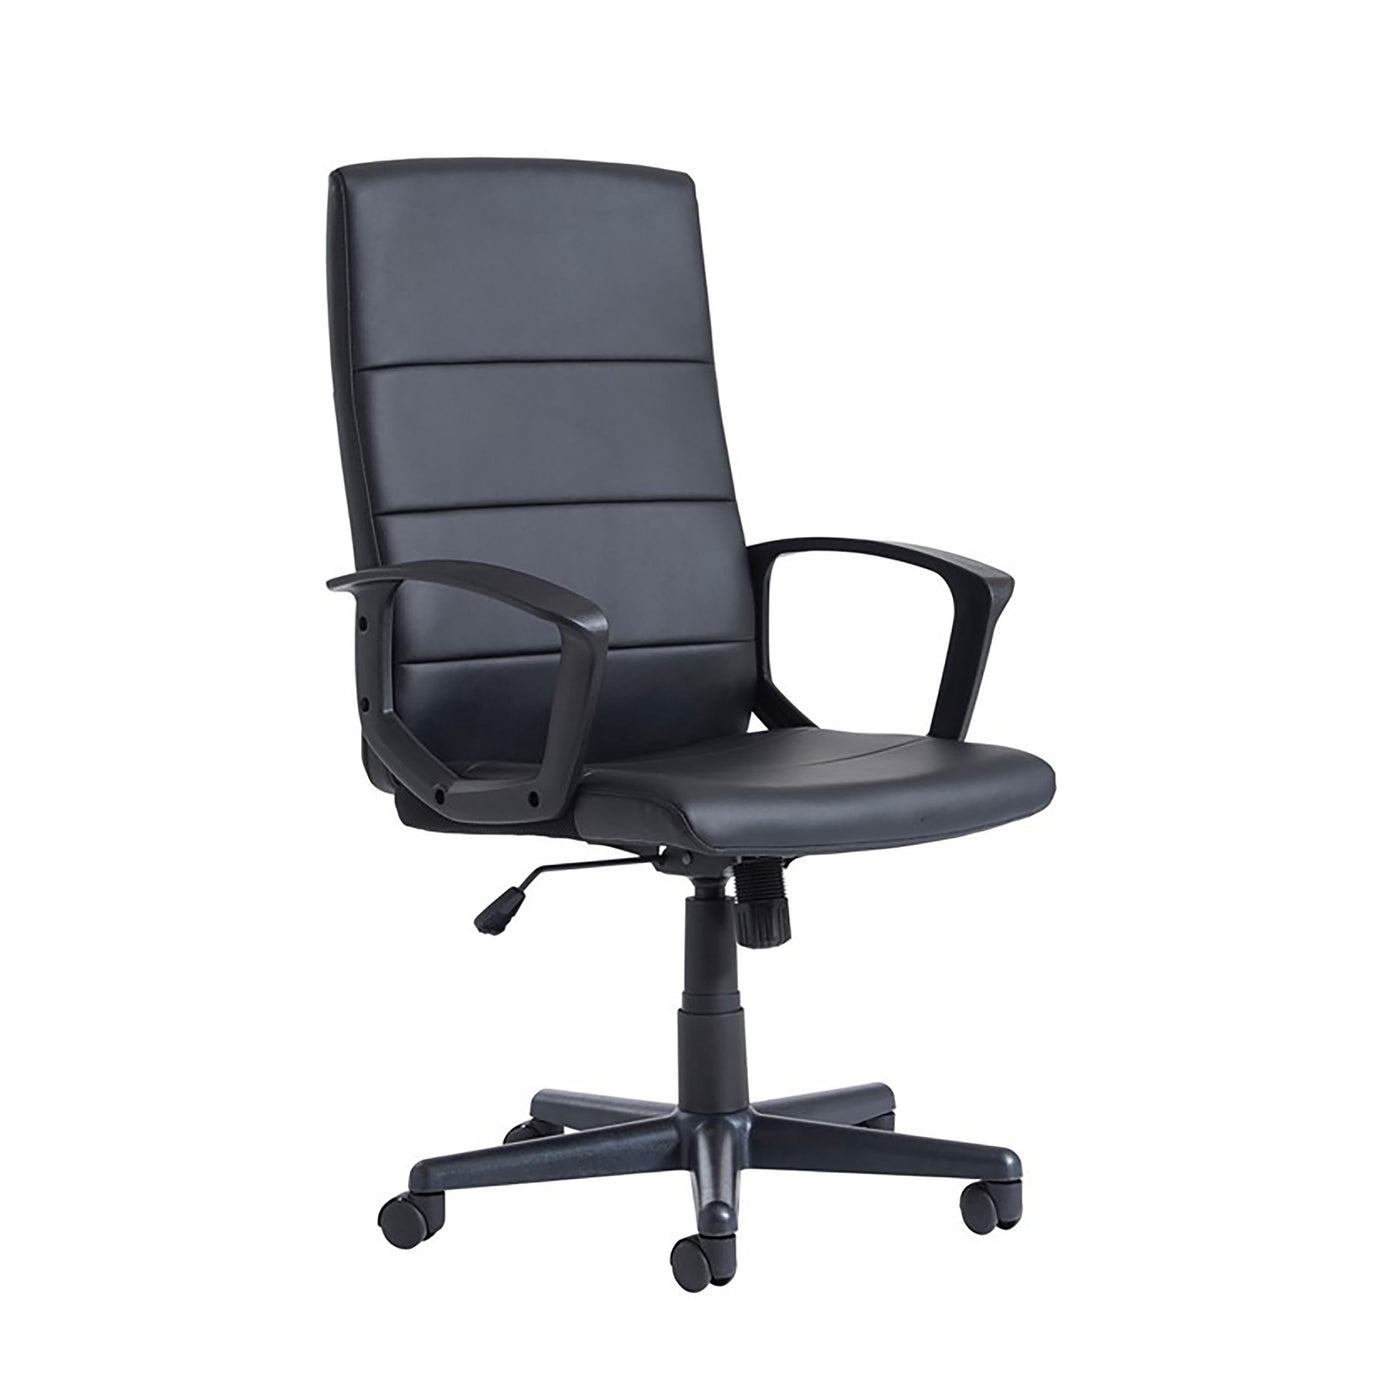 Ascona Black Faux Leather Office Chair | Home Office Chair | Ergonomic Chair | Home Office Furnishings